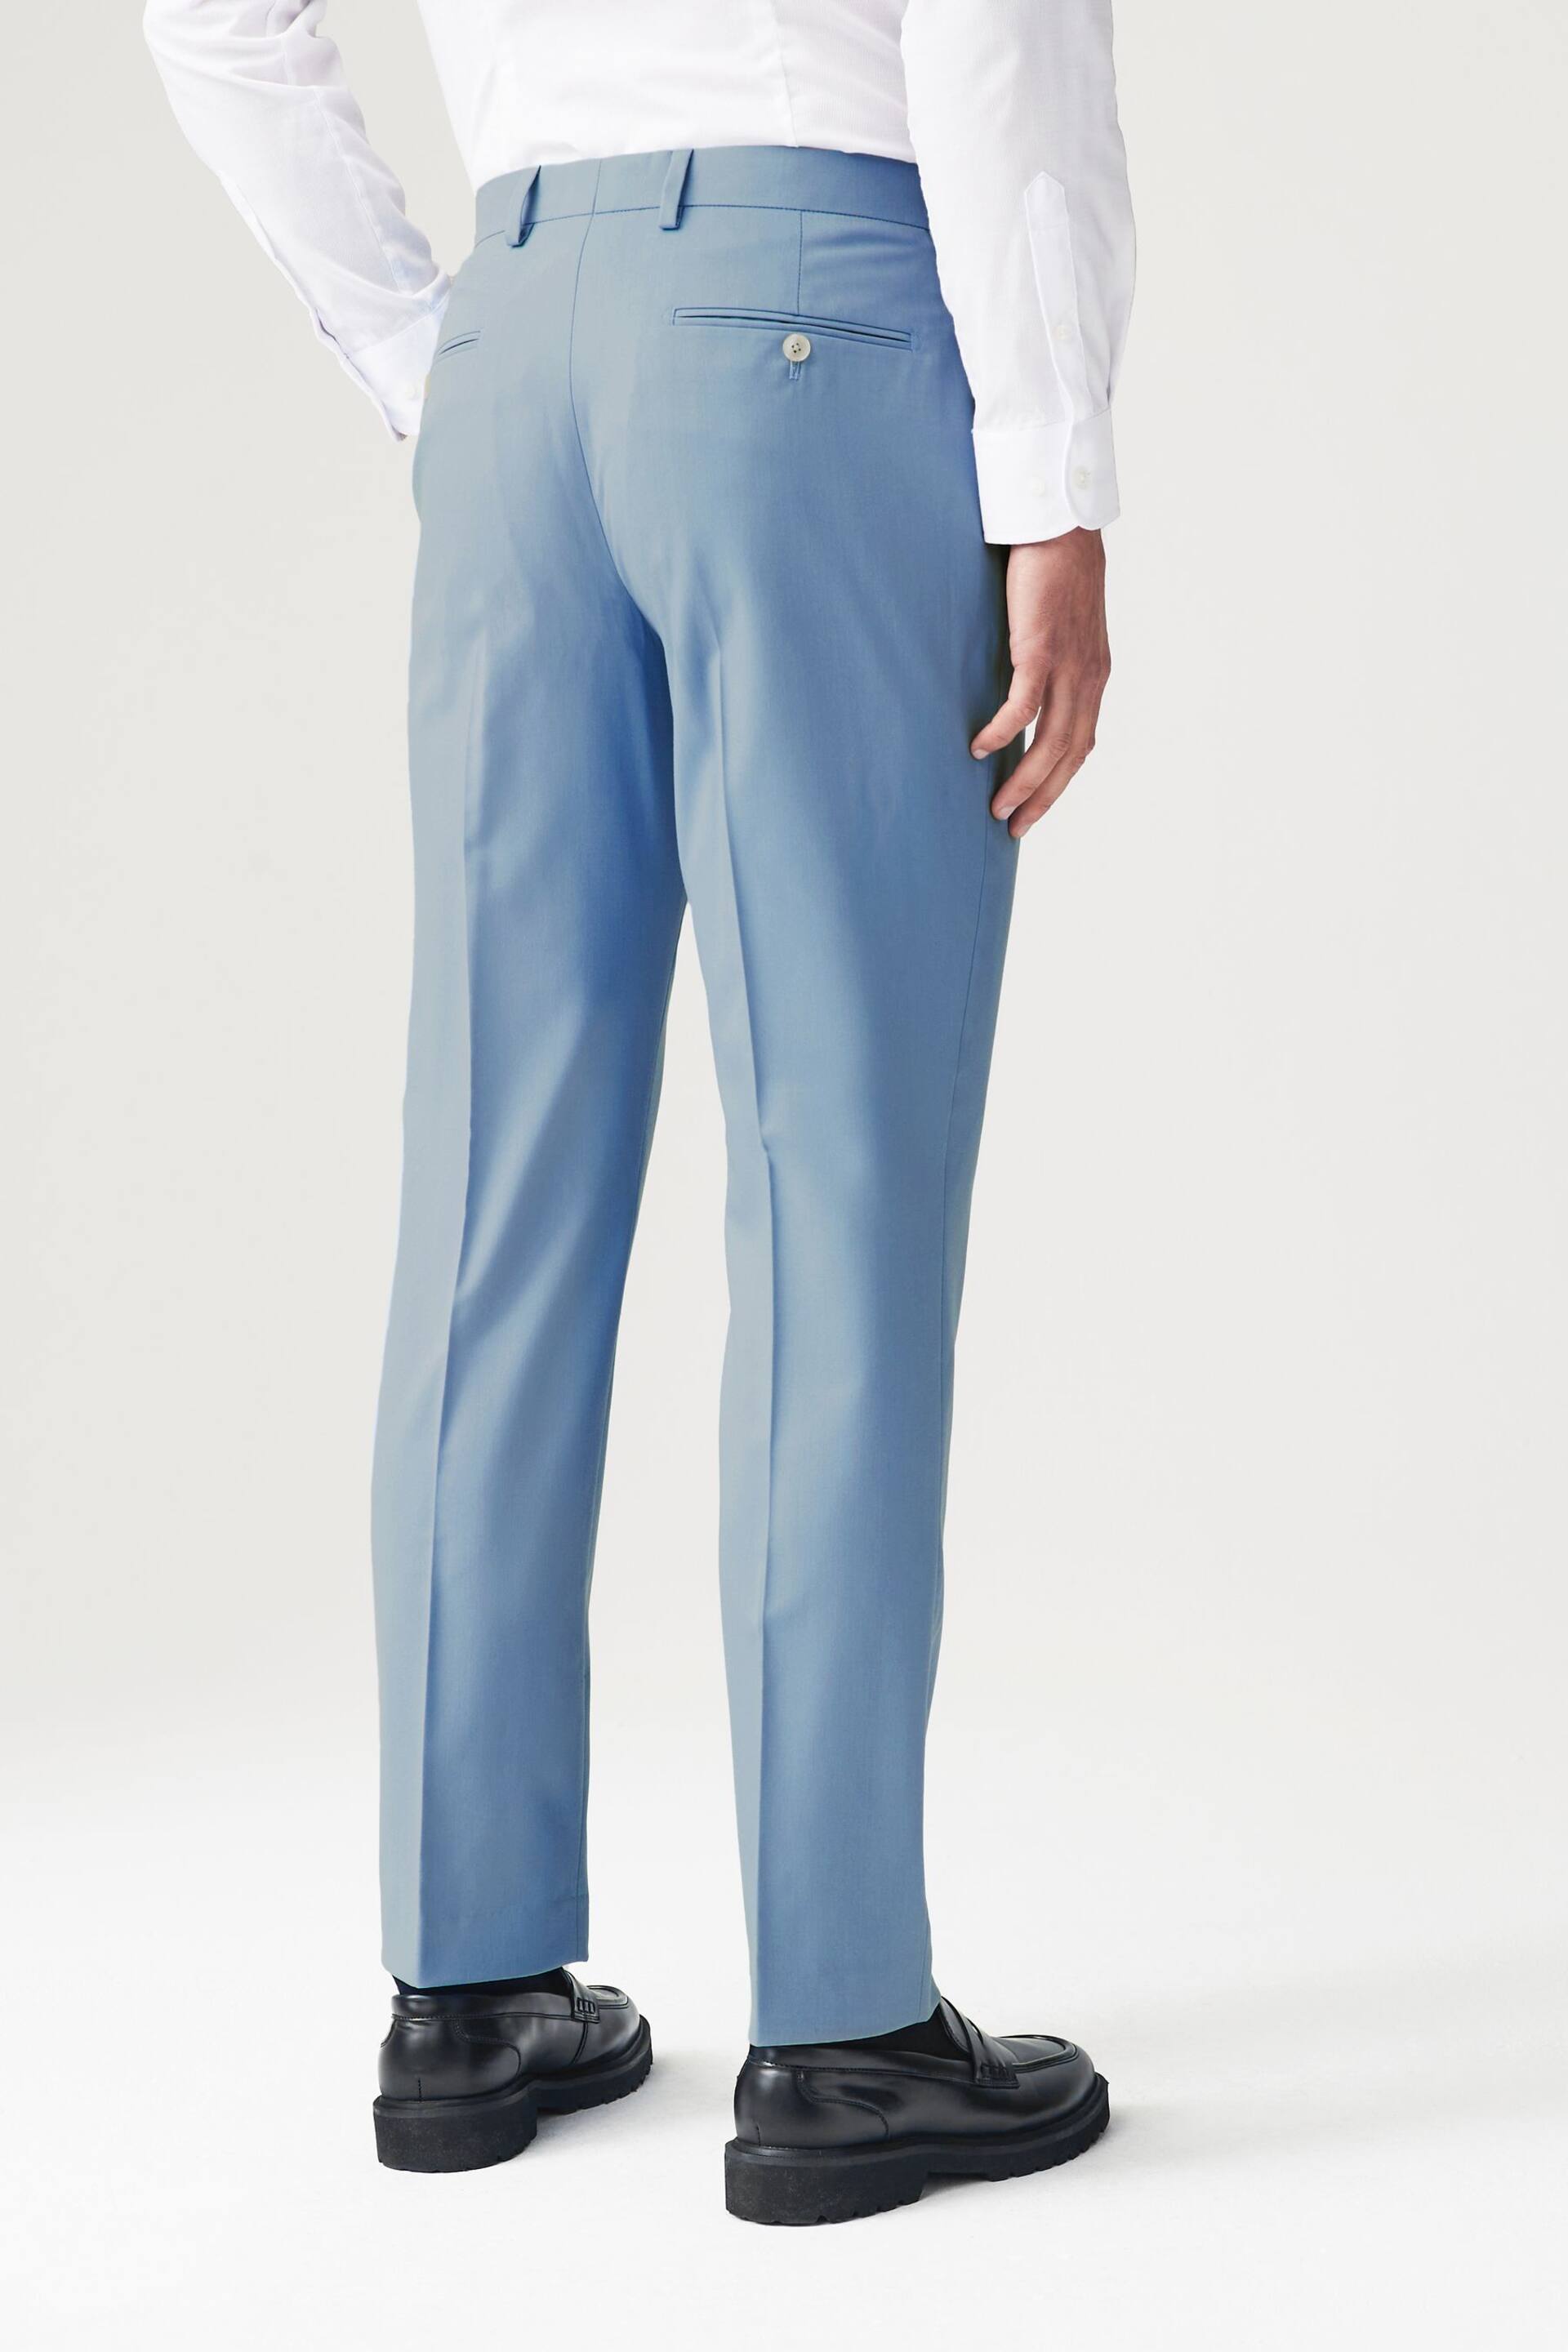 Light Blue Tailored Fit Motionflex Stretch Suit: Trousers - Image 3 of 8